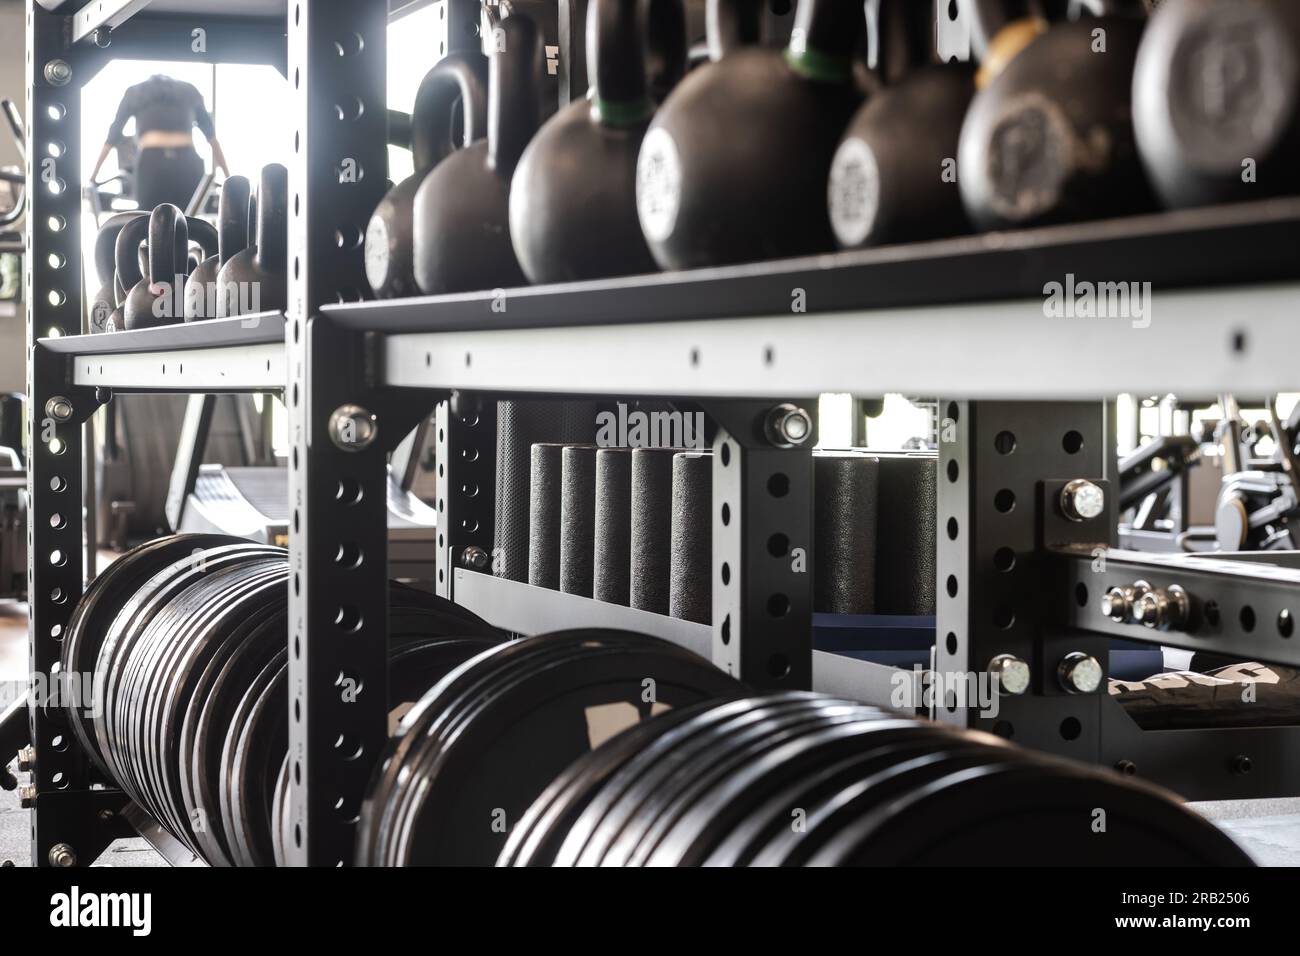 Closeup of Gym Equipment Shelf with Kettlebells, Weight Plate and Massage Rollers for Strength Training. Healthy Lifestyle and Fitness Theme. Stock Photo